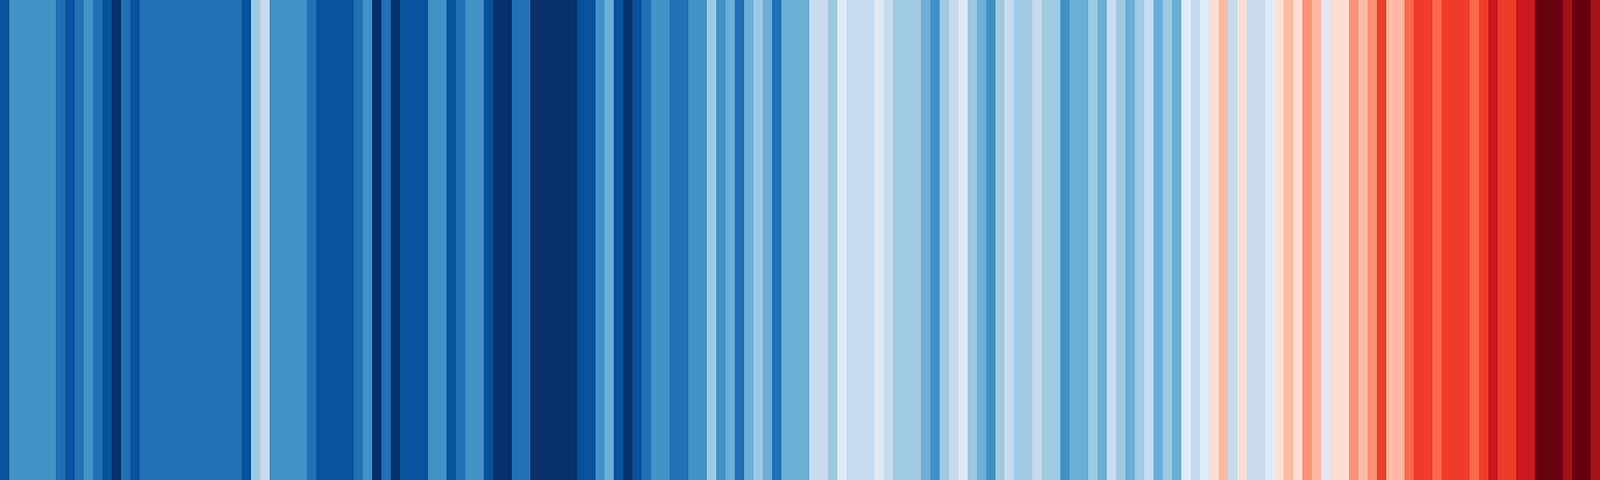 IMAGE: A bar chart illustrating the increase in the global temperature in the last 170 years